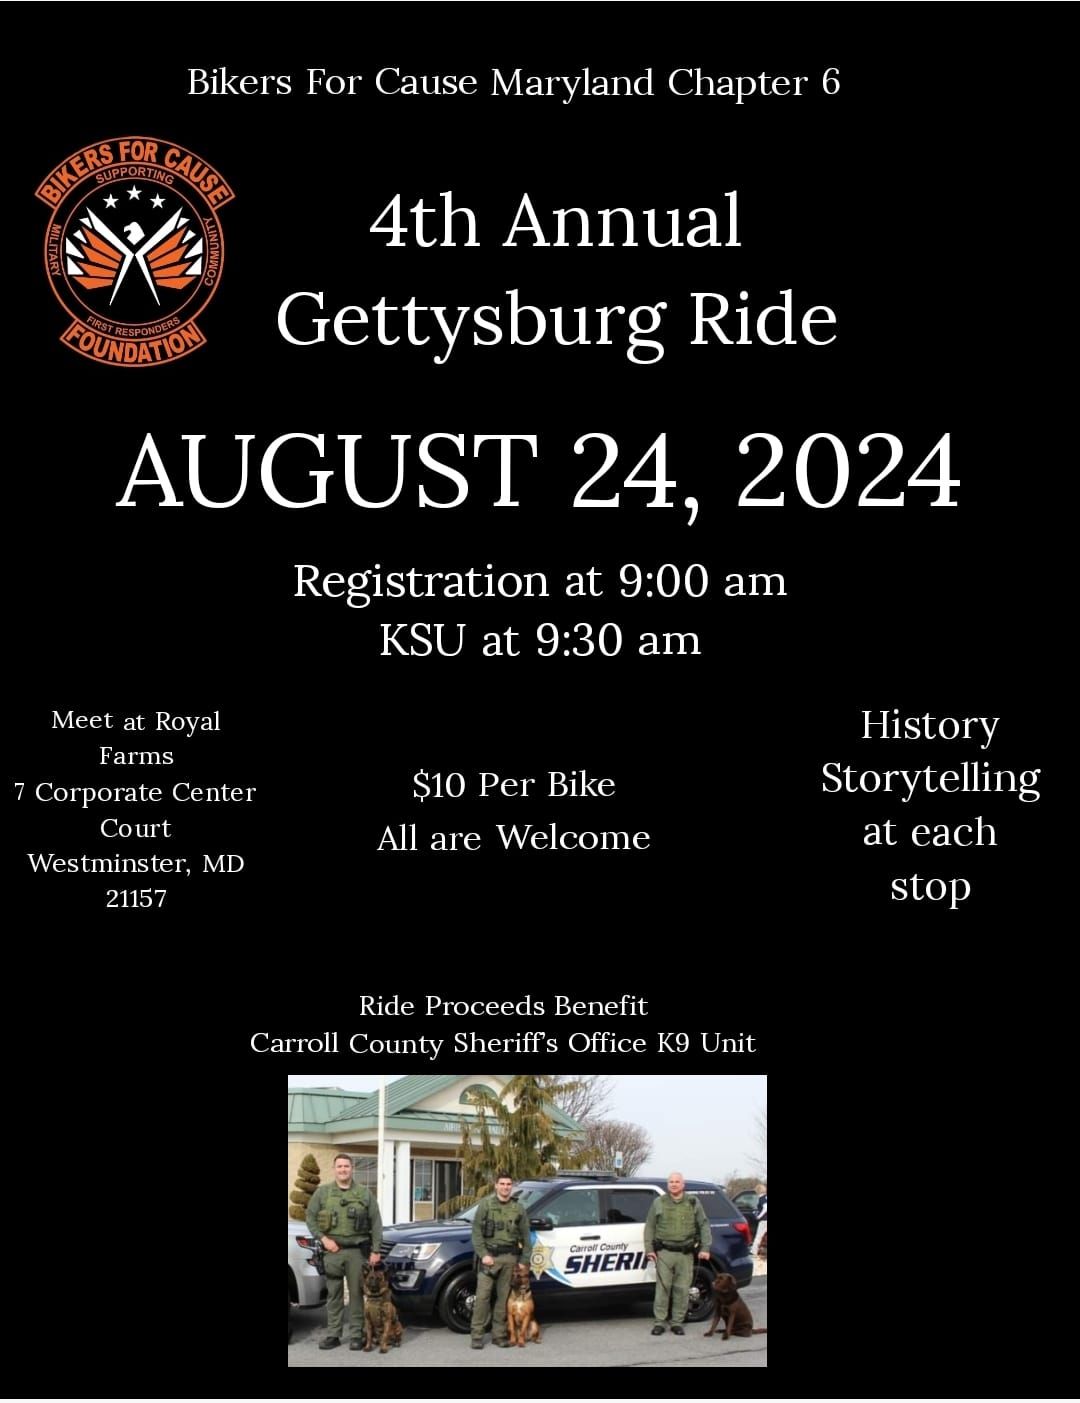 BFCF MD6 4th Annual Gettysburg Ride Benefiting Carroll County Sheriff's Office K9 Unit